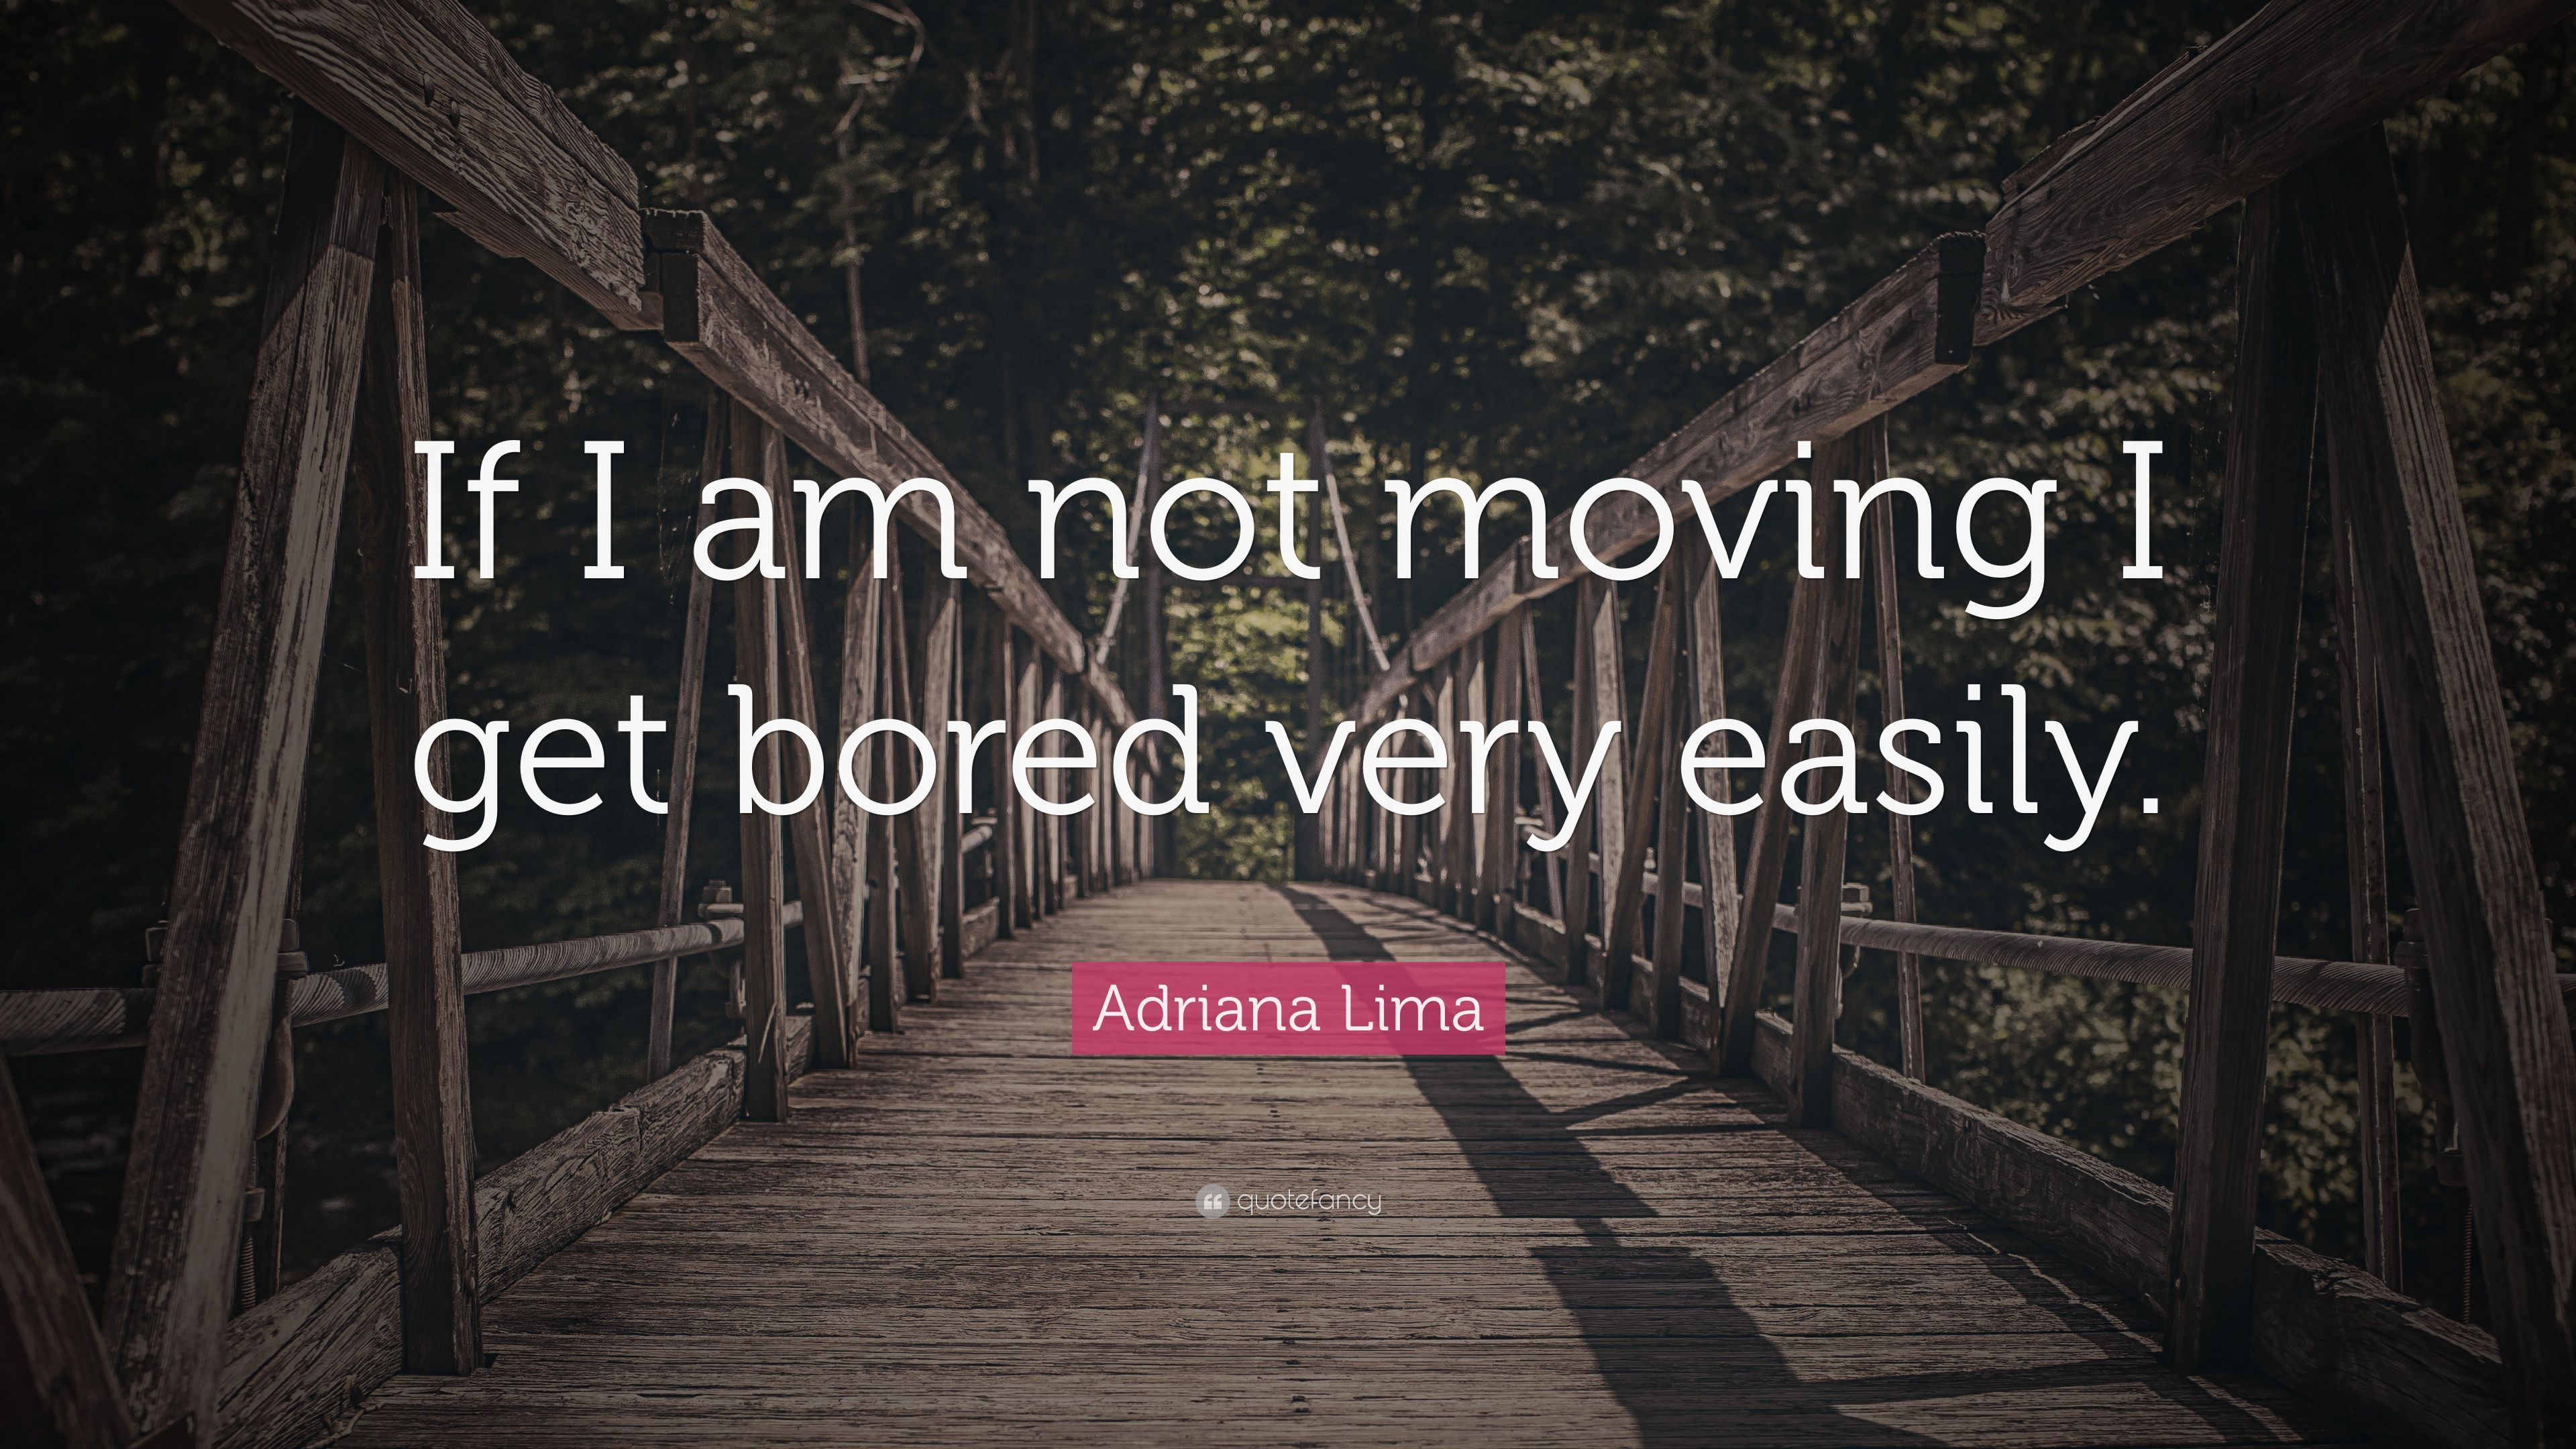 Adriana Lima Quote: “If I am not moving I get bored very easily